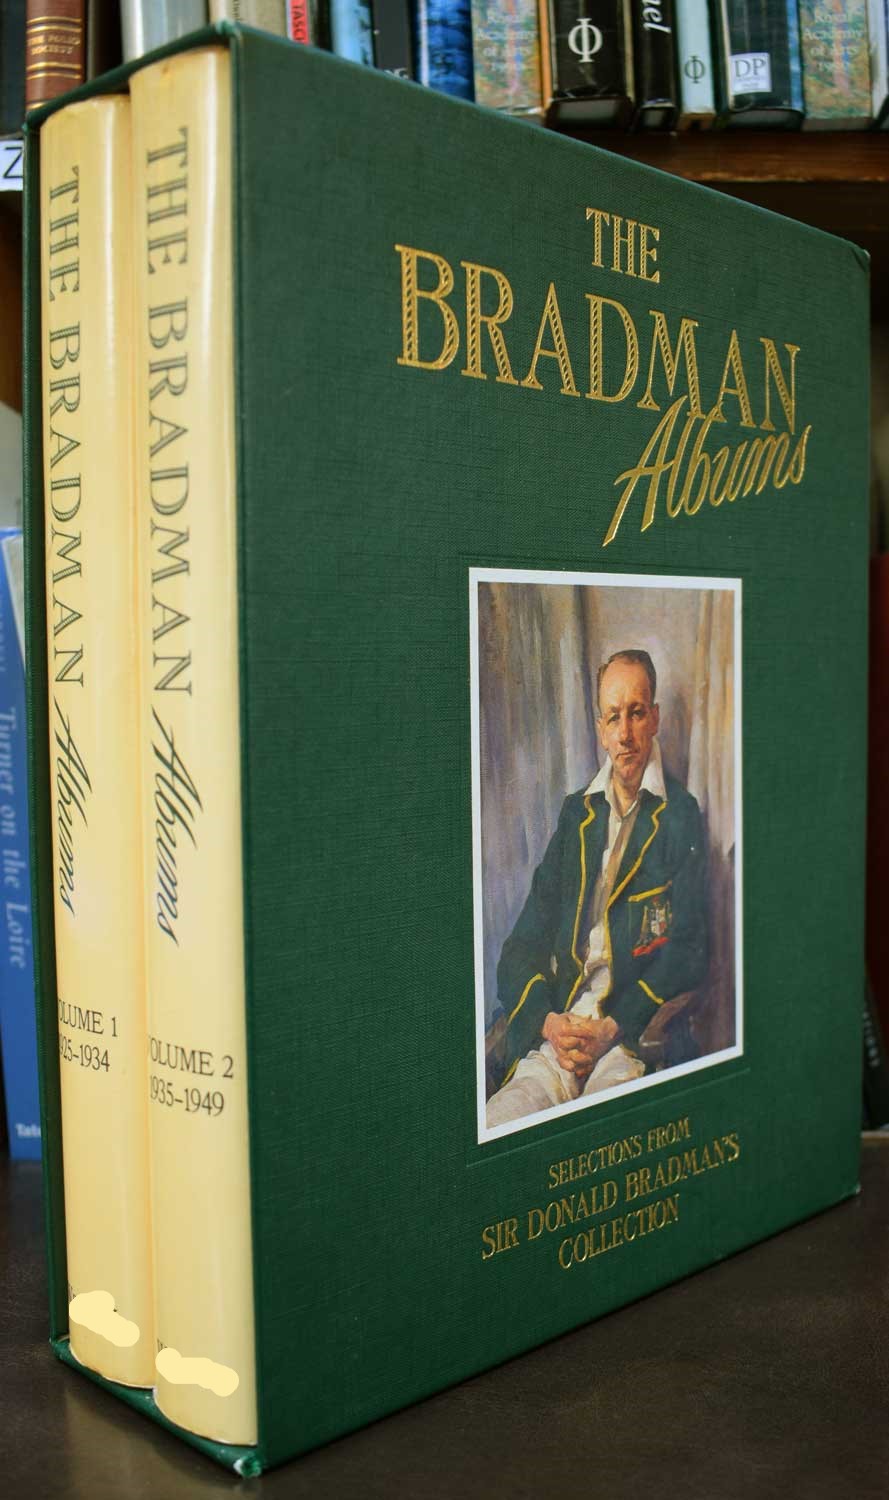 The Bradman Albums. Selections from Sir Donald Bradman's Official Collection. 2 volume set.